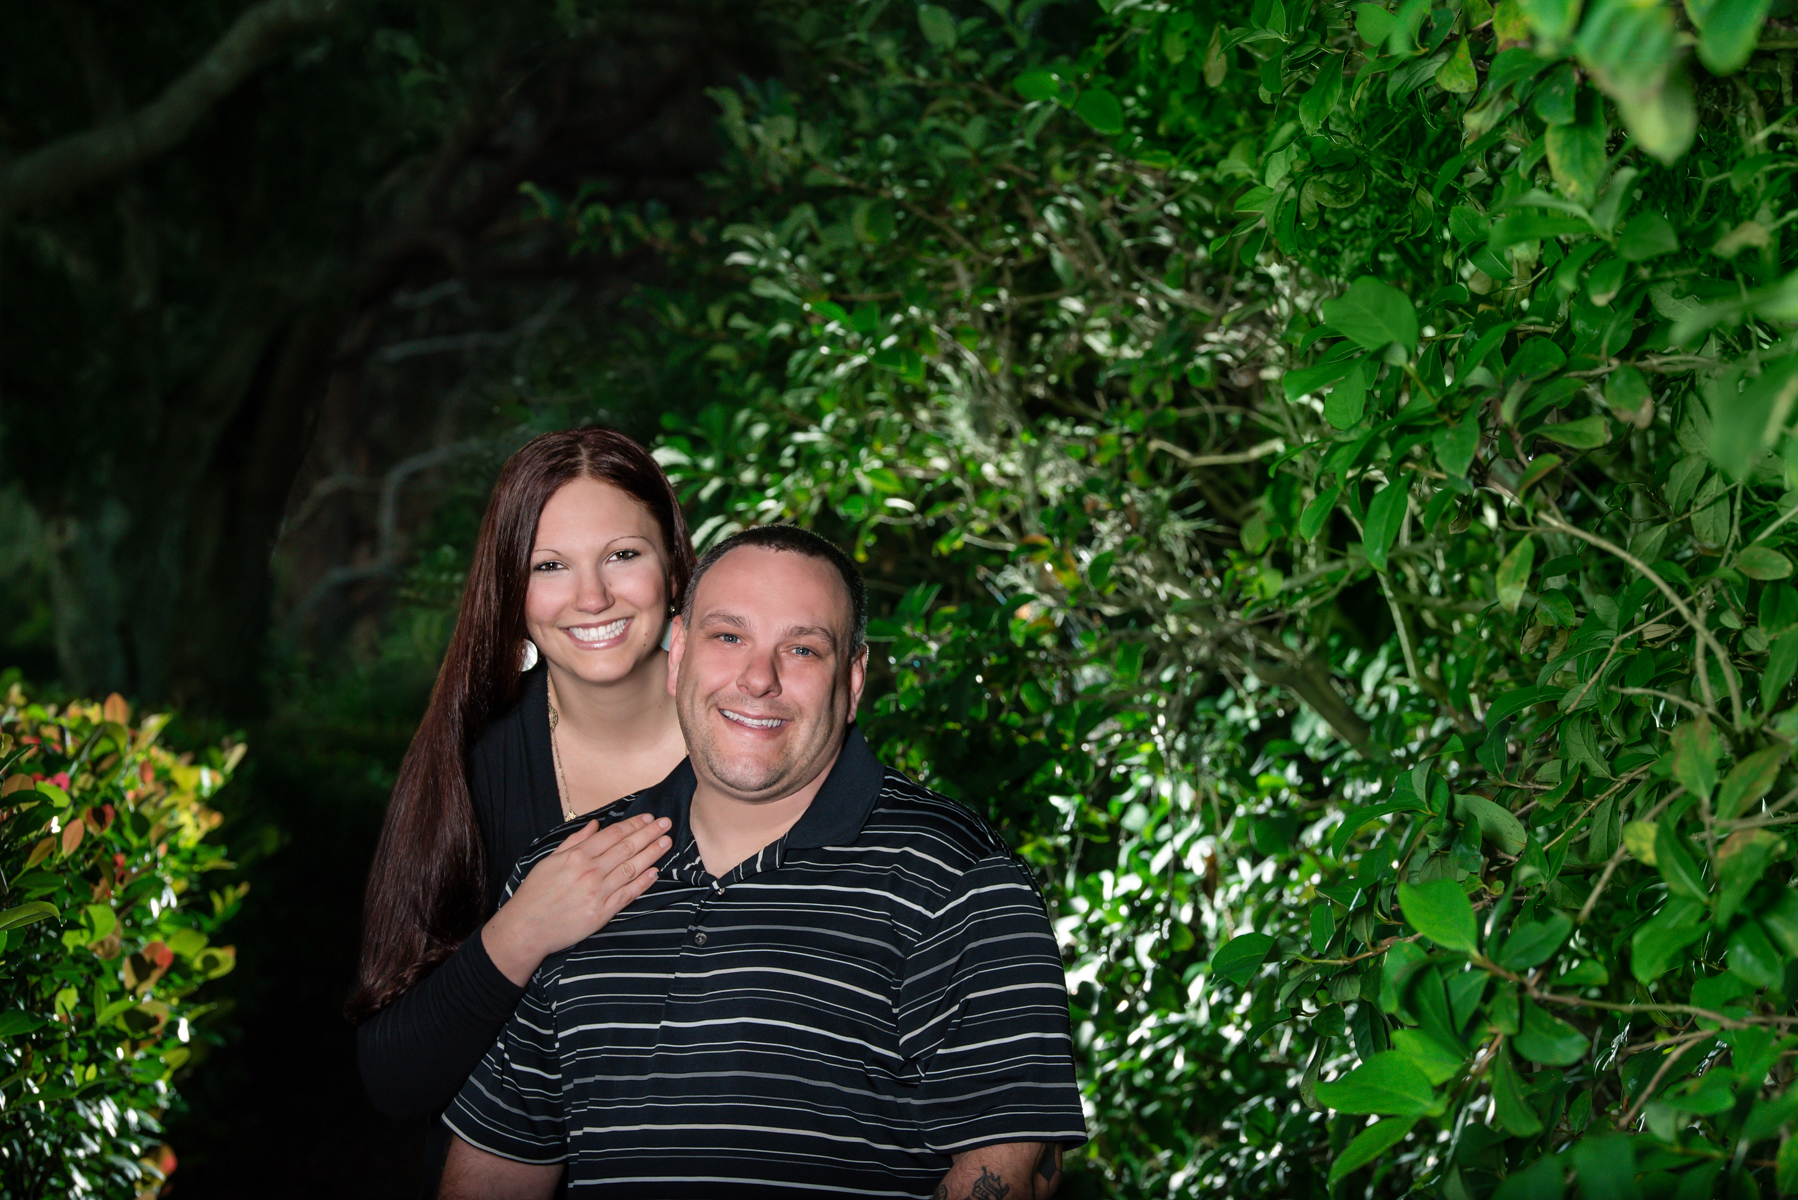 Call 561-307-9875 to schedule your family photo session.